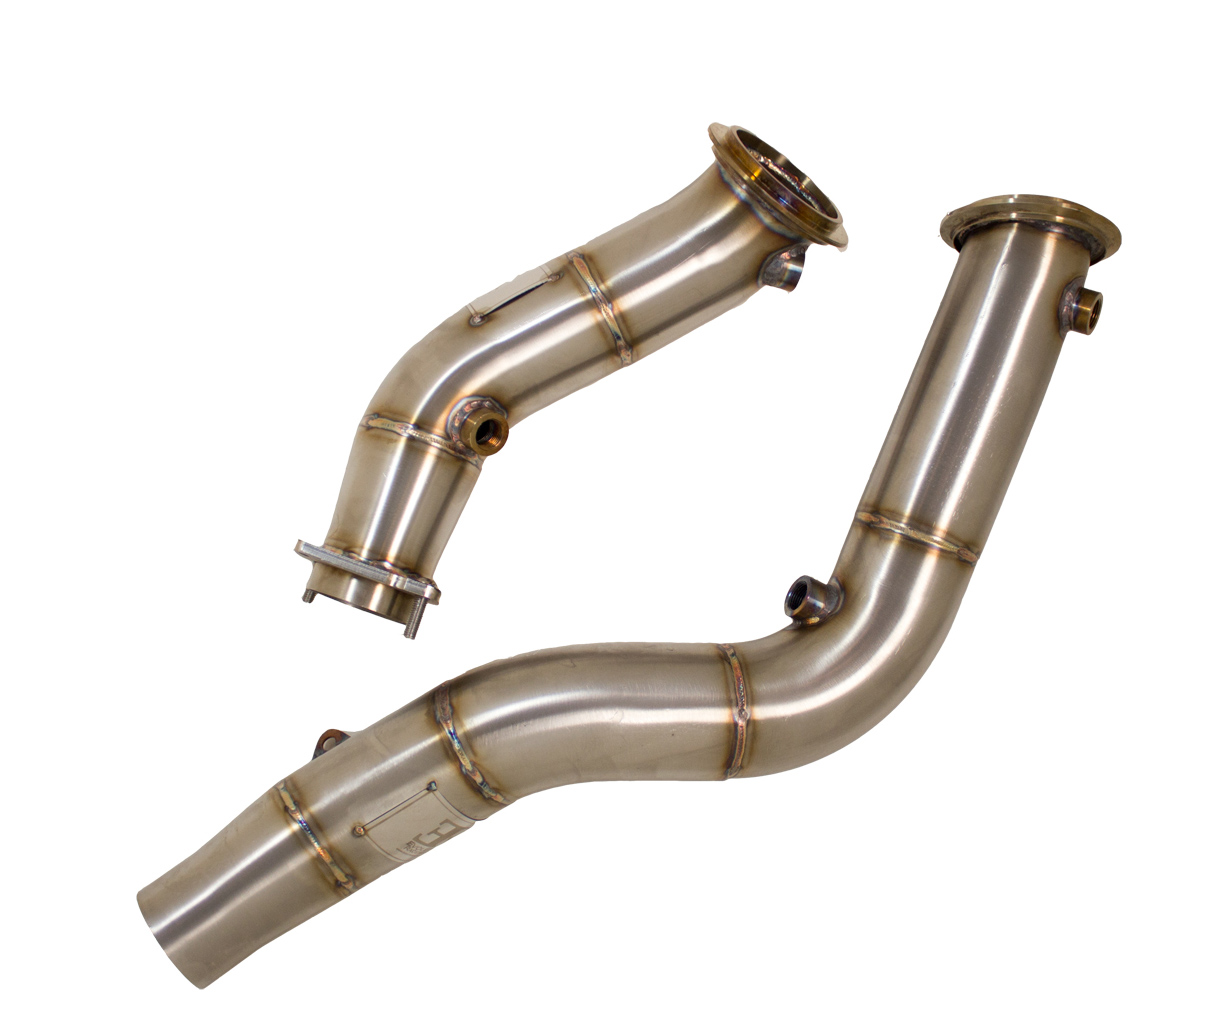 Evolution Racewerks BMW S55 M3/M4 catless downpipes. ER S55 DP Made in the US